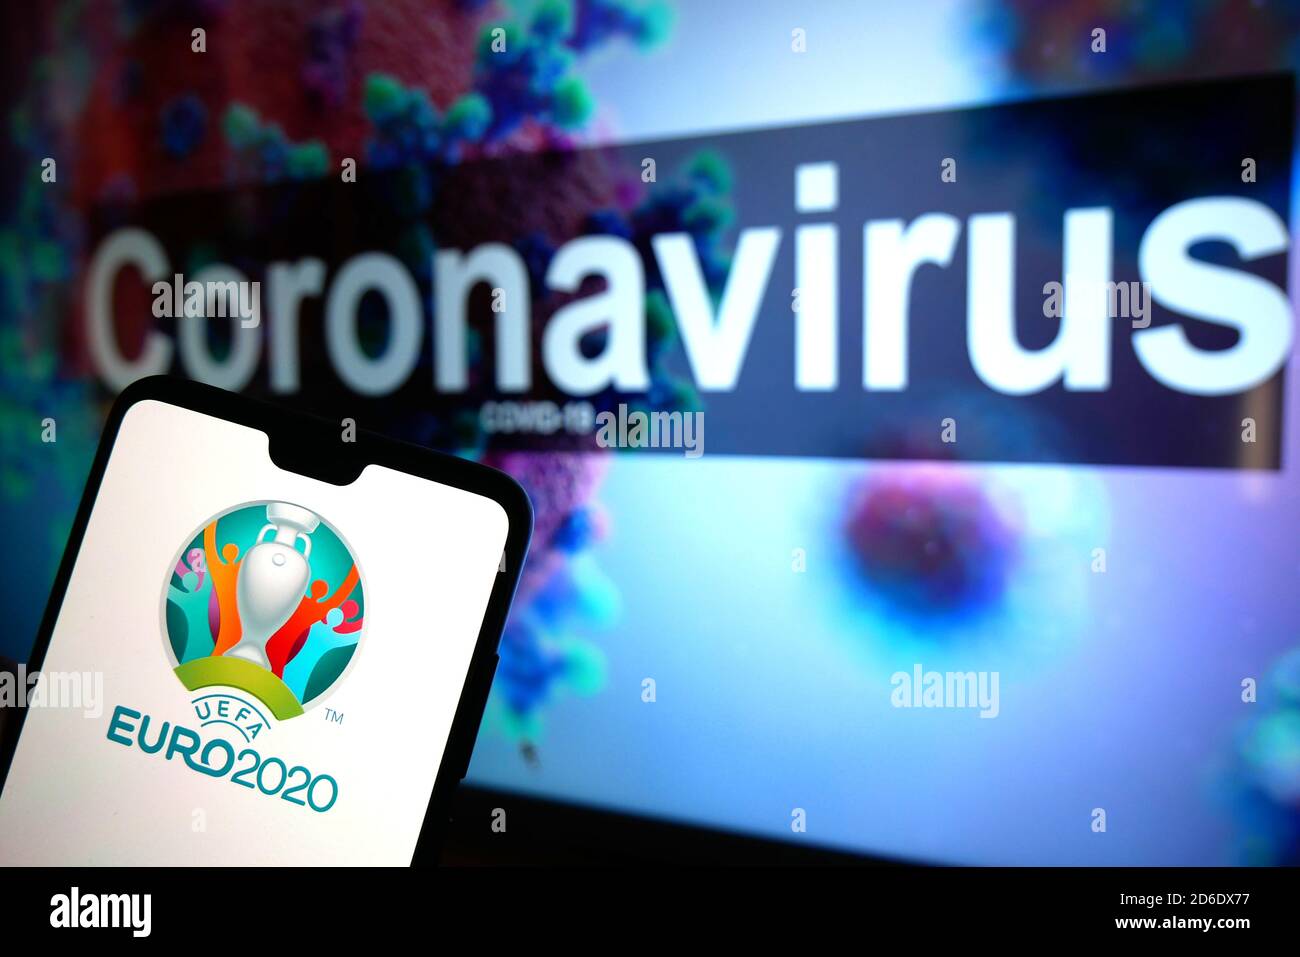 The UEFA Euro 2020 logo seen displayed on a mobile phone with an illustrative model of the Coronavirus displayed on a monitor in the background. Stock Photo